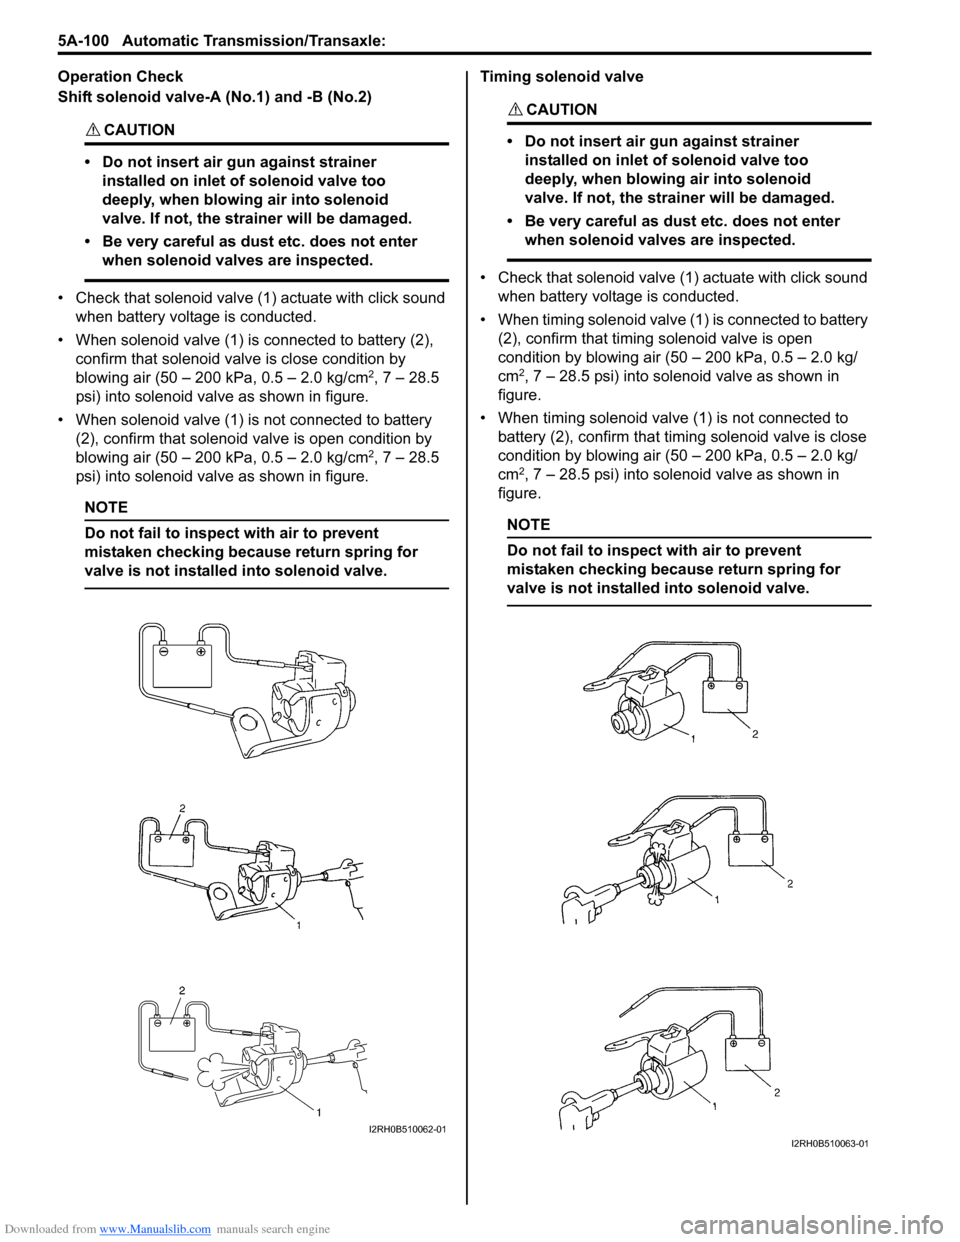 SUZUKI SWIFT 2007 2.G Service Workshop Manual Downloaded from www.Manualslib.com manuals search engine 5A-100 Automatic Transmission/Transaxle: 
Operation Check
Shift solenoid valve-A (No.1) and -B (No.2)
CAUTION! 
• Do not insert air gun again